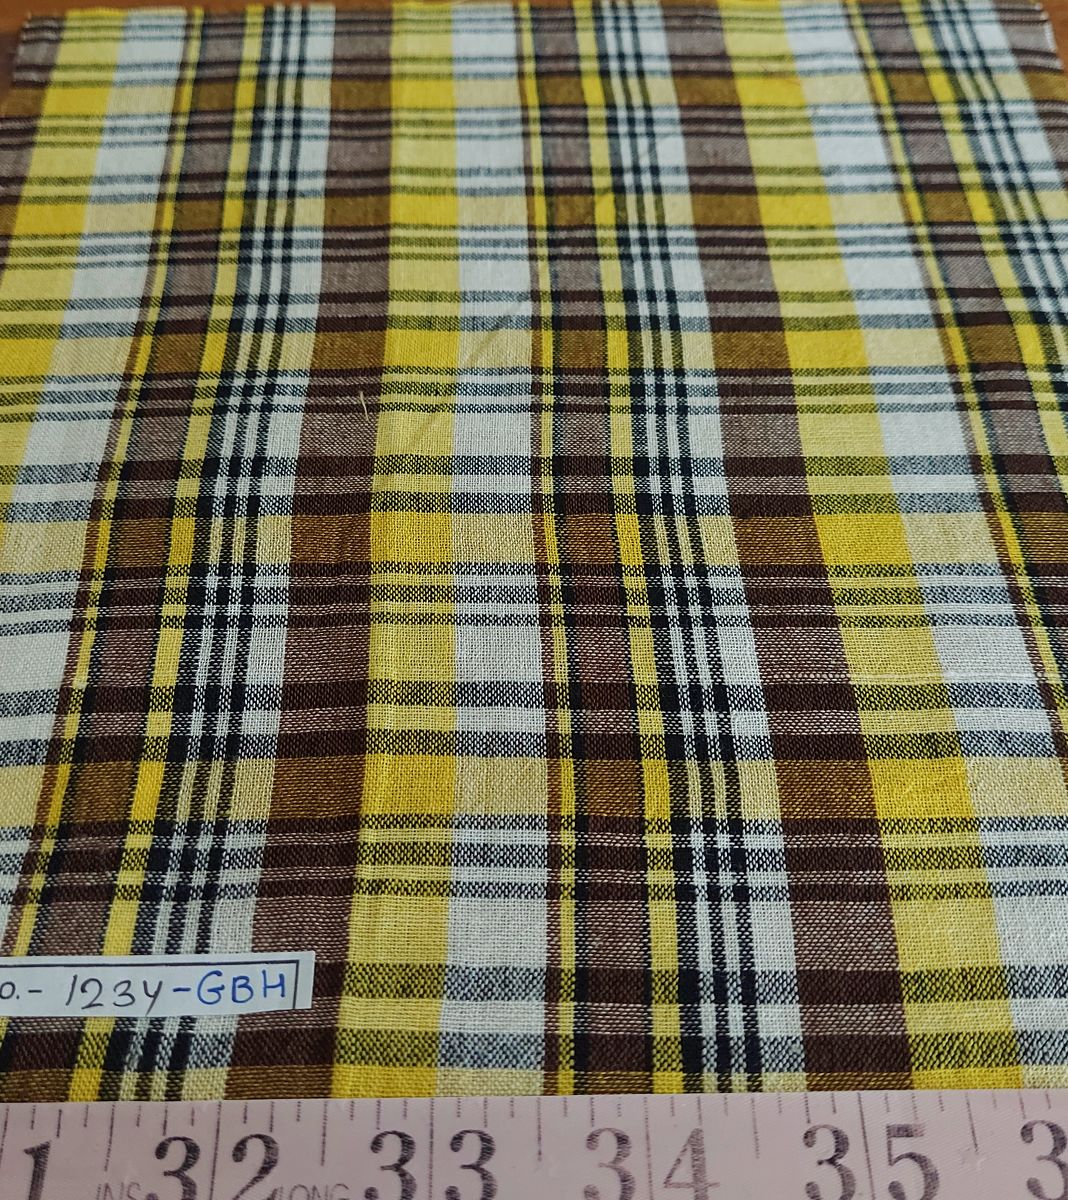 Handwoven Yellow Brown Madras Plaid Fabric for slow sewing, retro skirts & dresses, men's shirts, children's clothing & decor.